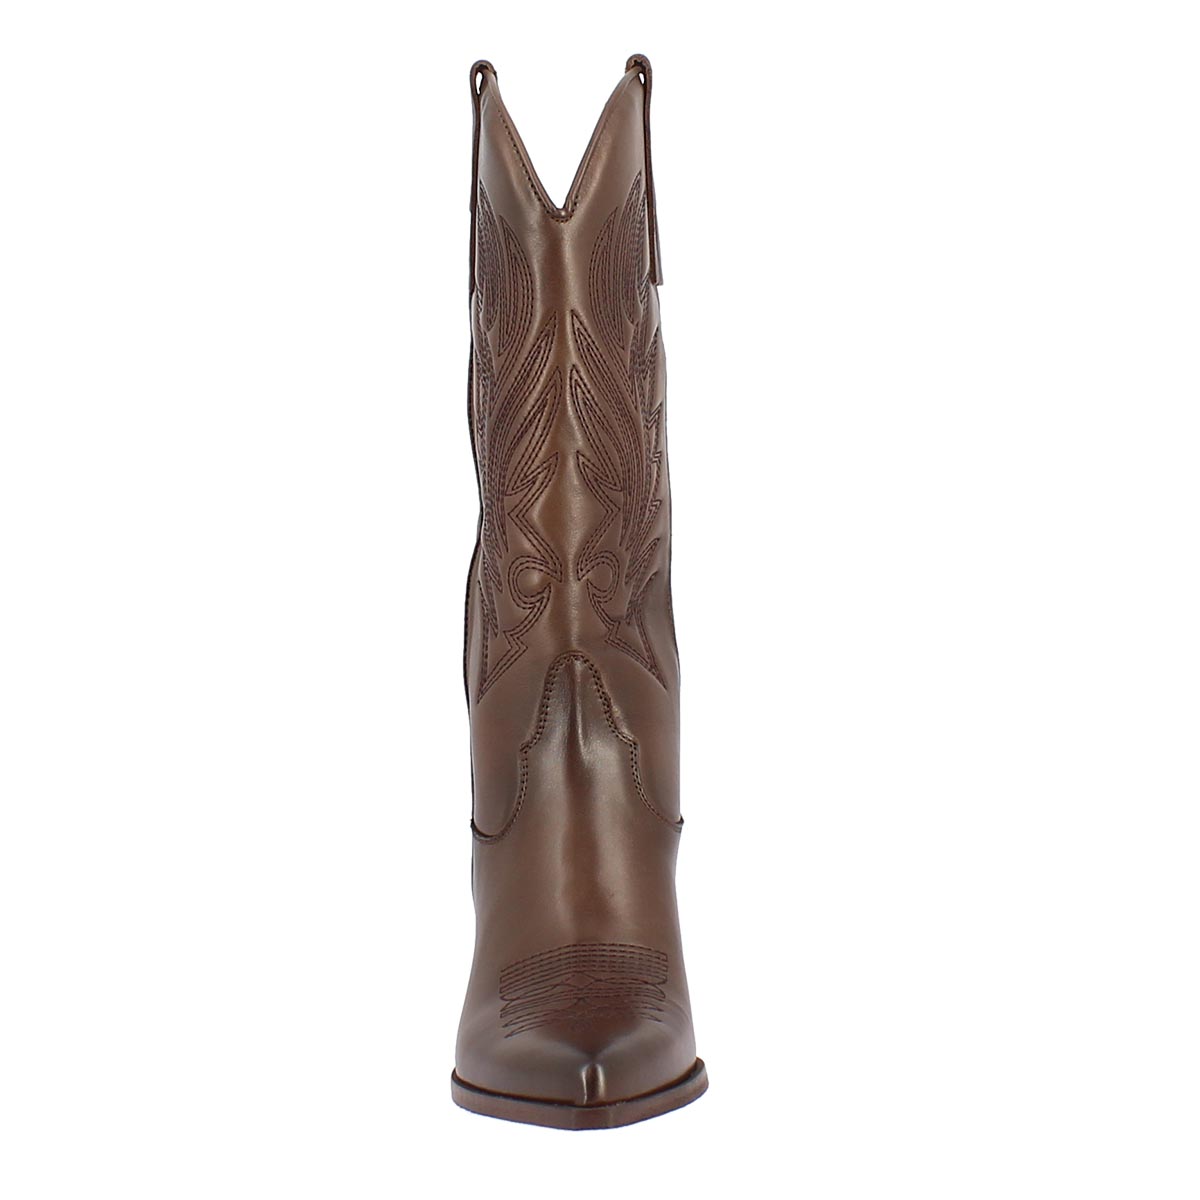 Women's Texan boot in brown leather with embroidery